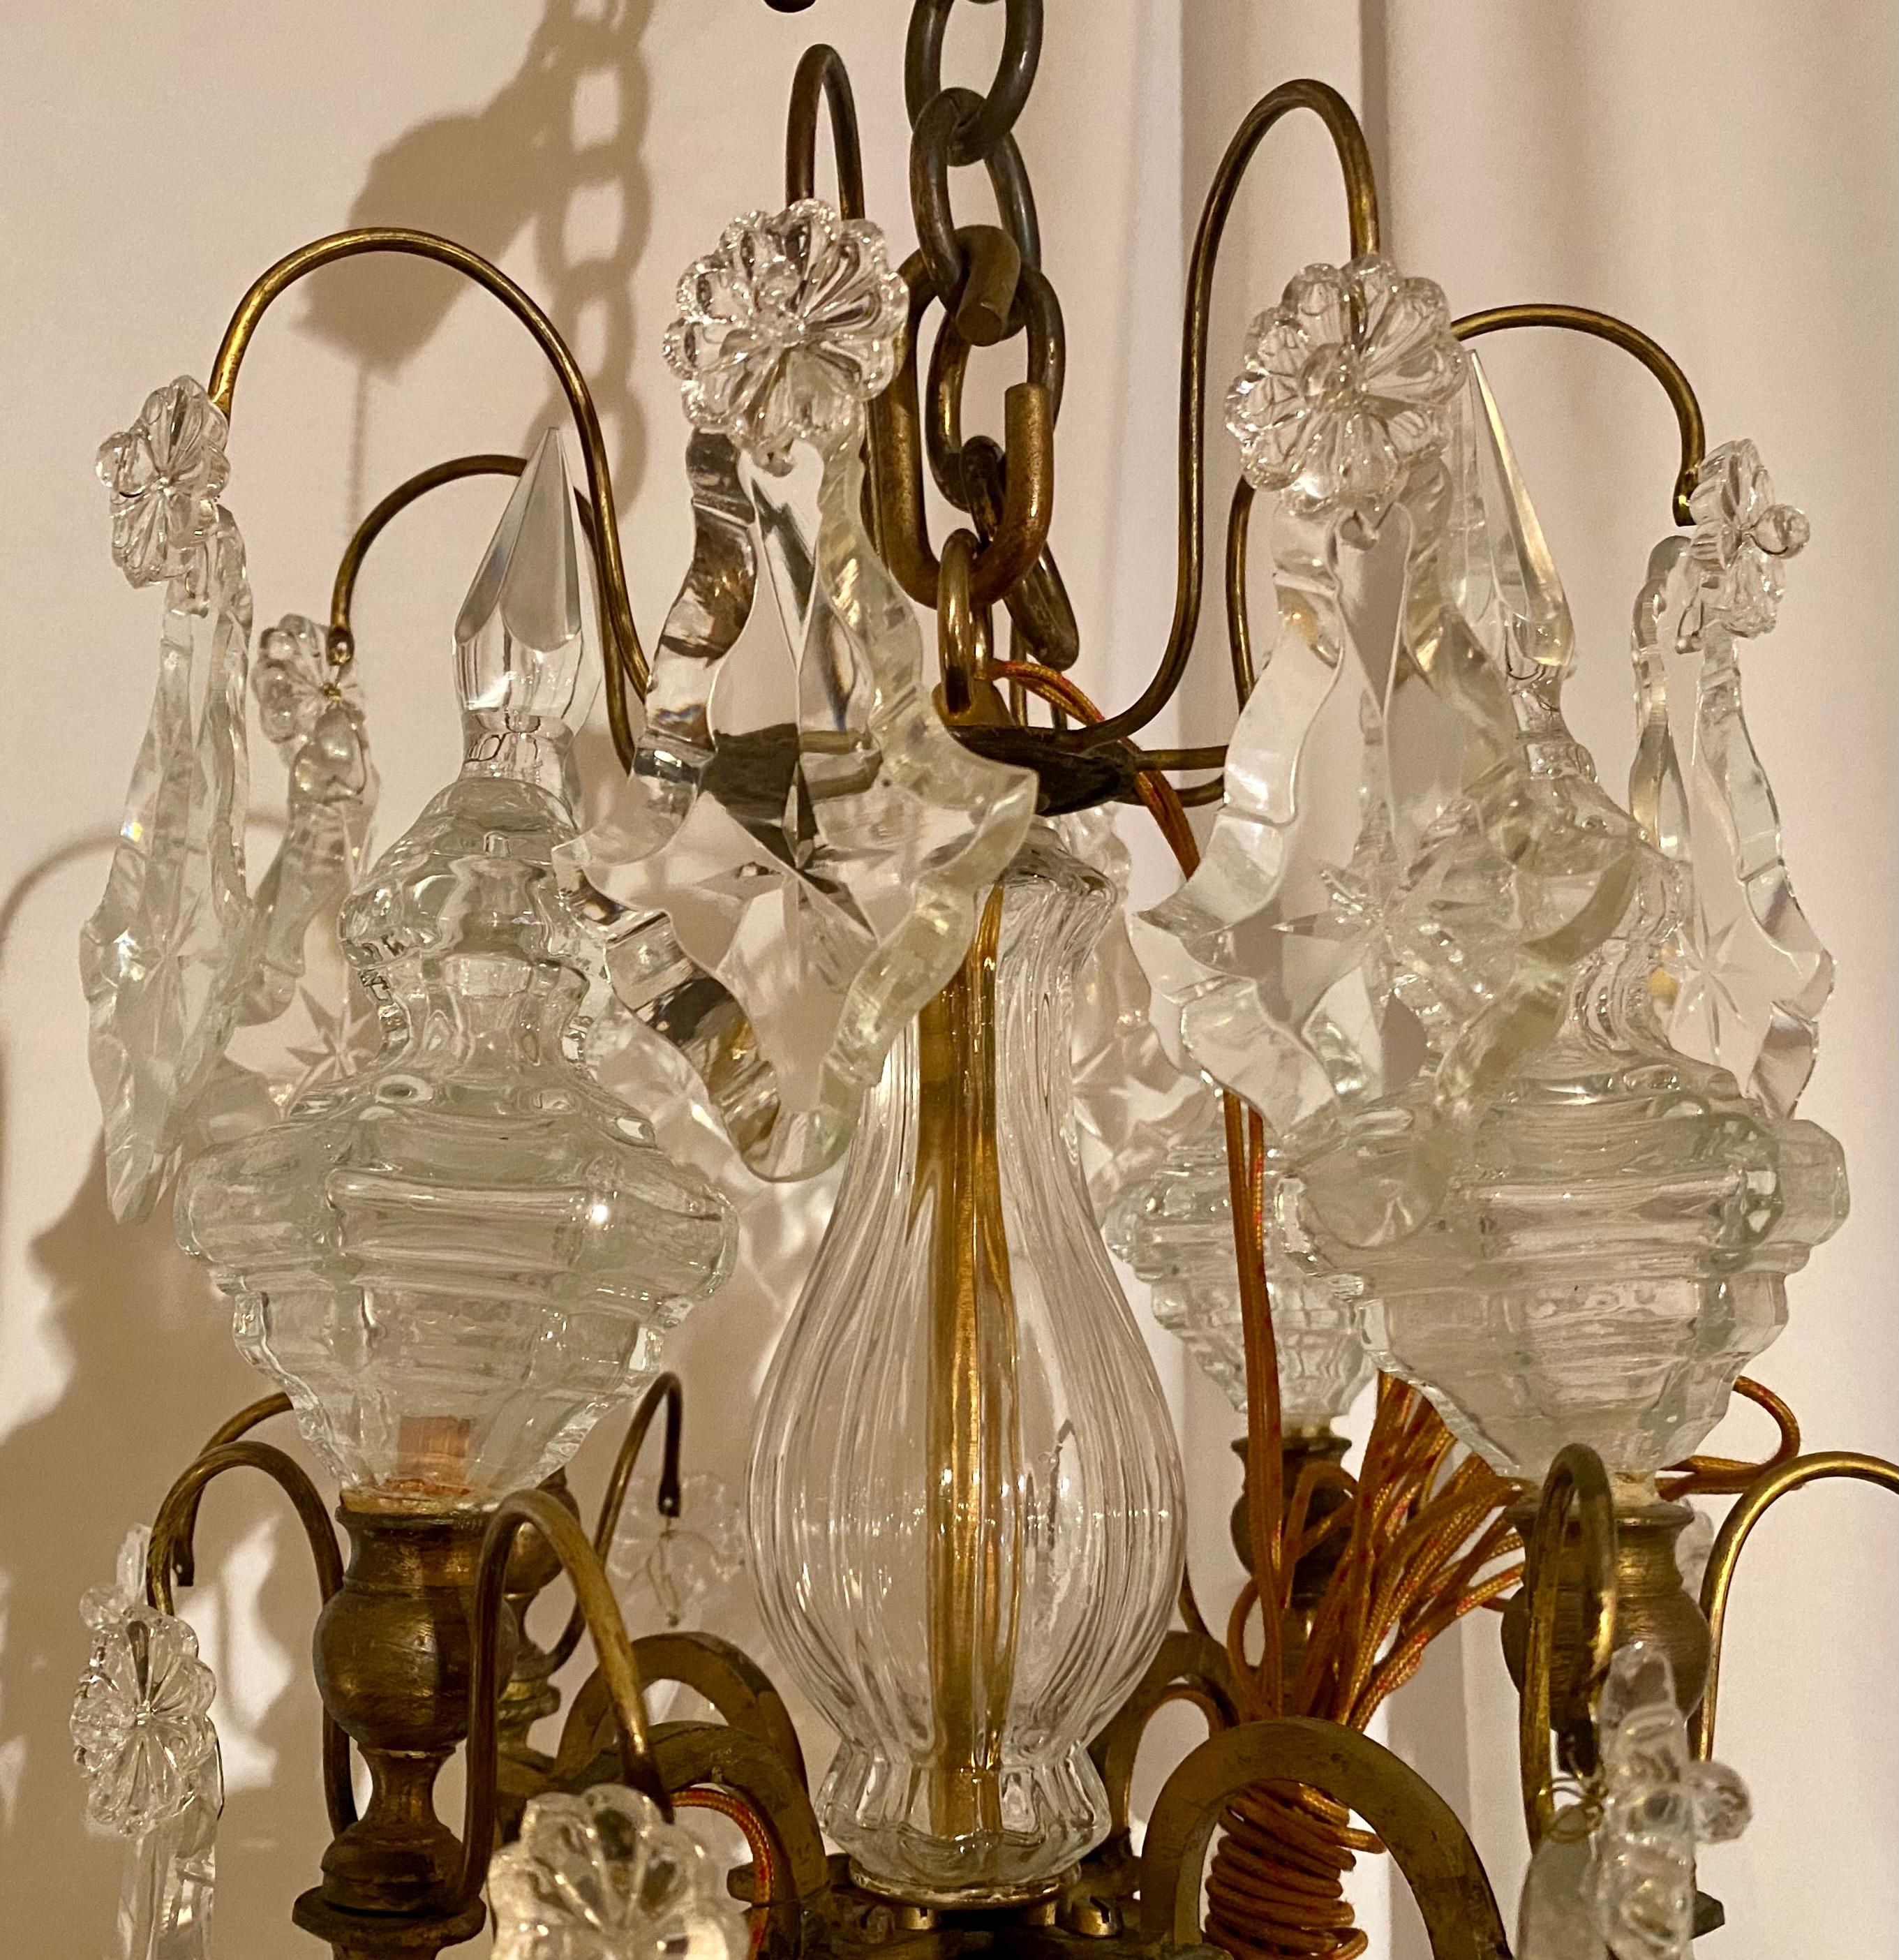 Antique French original Baccarat crystal and bronze chandelier, circa 1880. All original crystal.
CHC004.